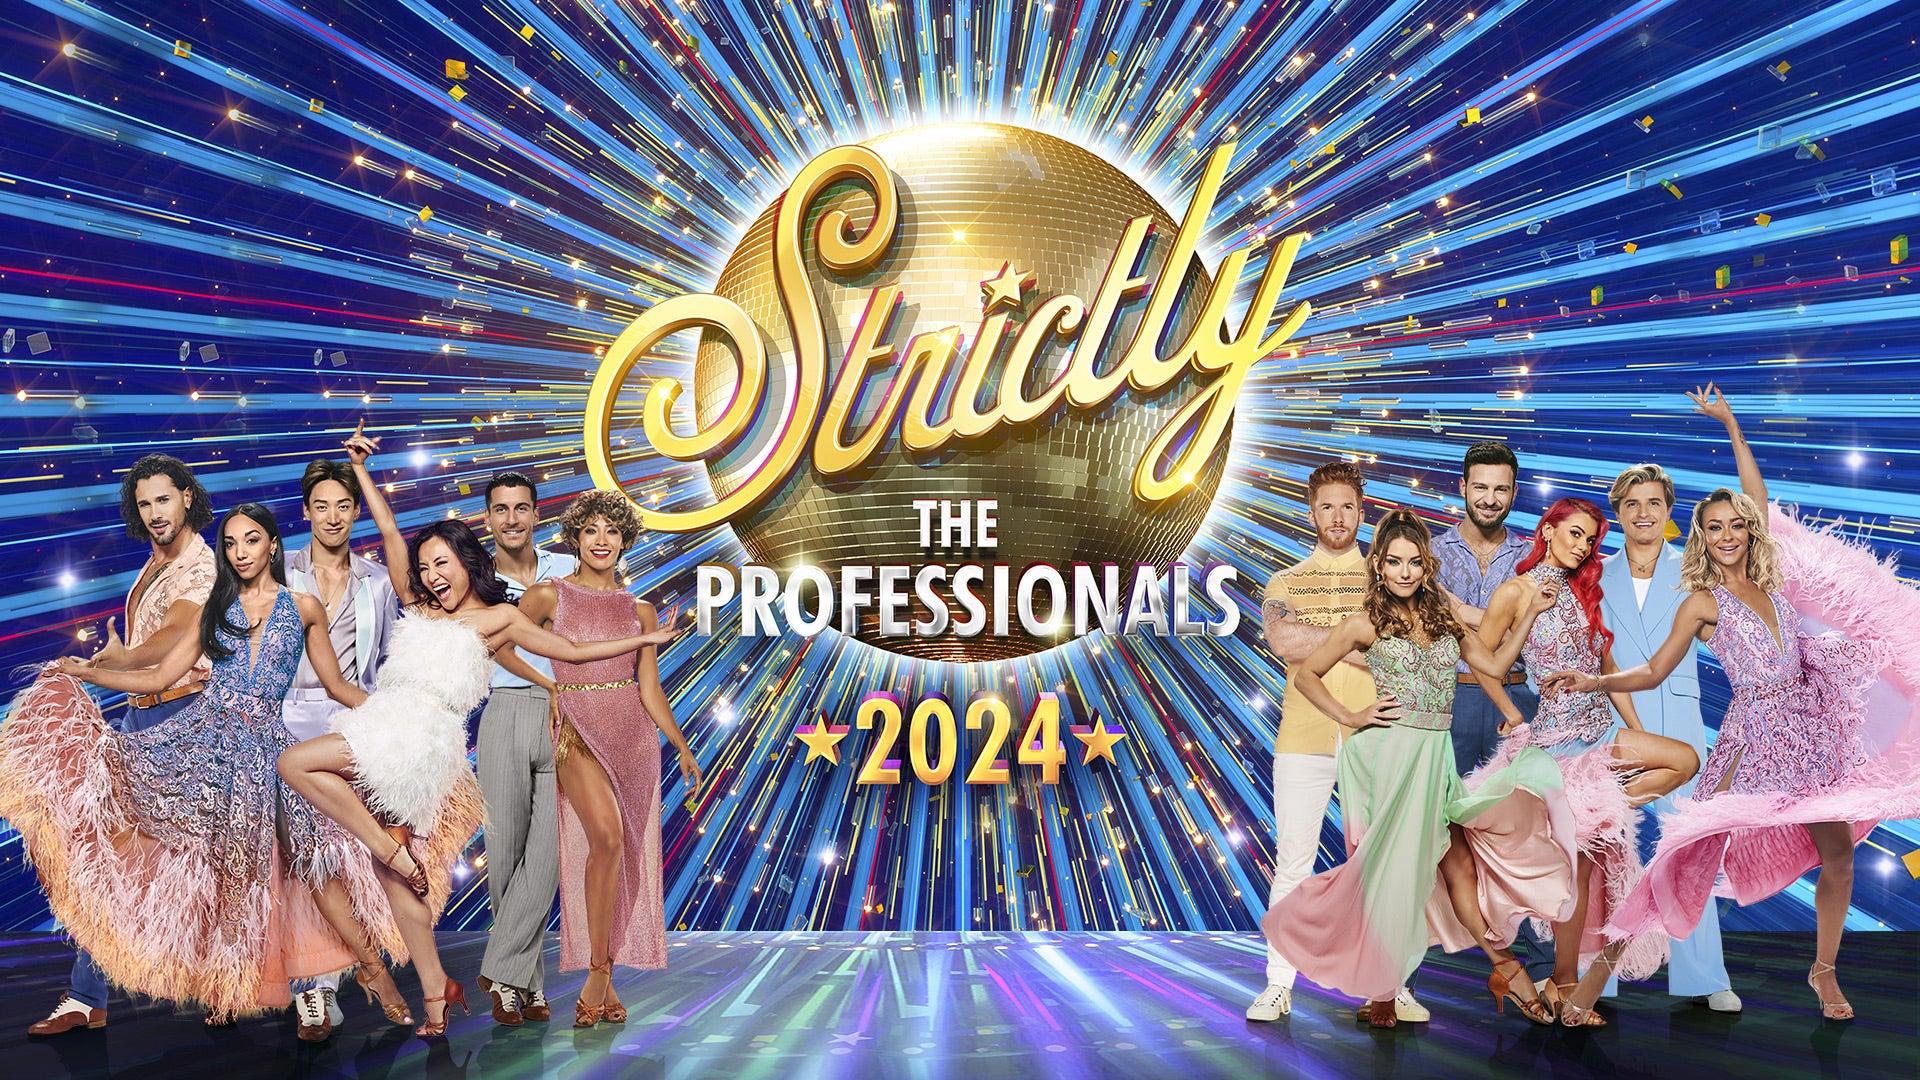 Strictly Come Dancing – The Professionals